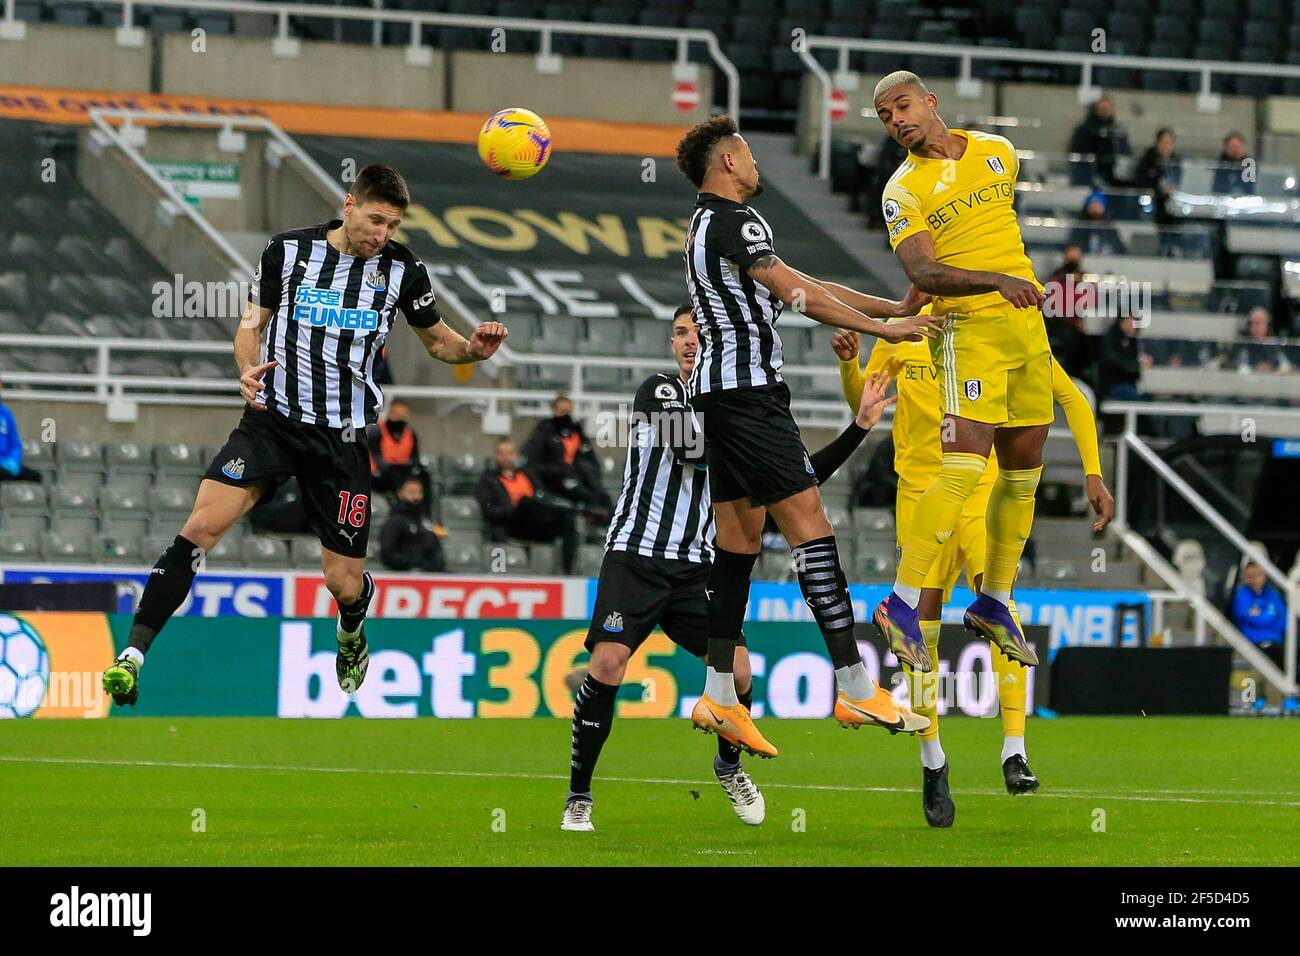 Federico Fernández #18 of Newcastle United heads the ball Stock Photo